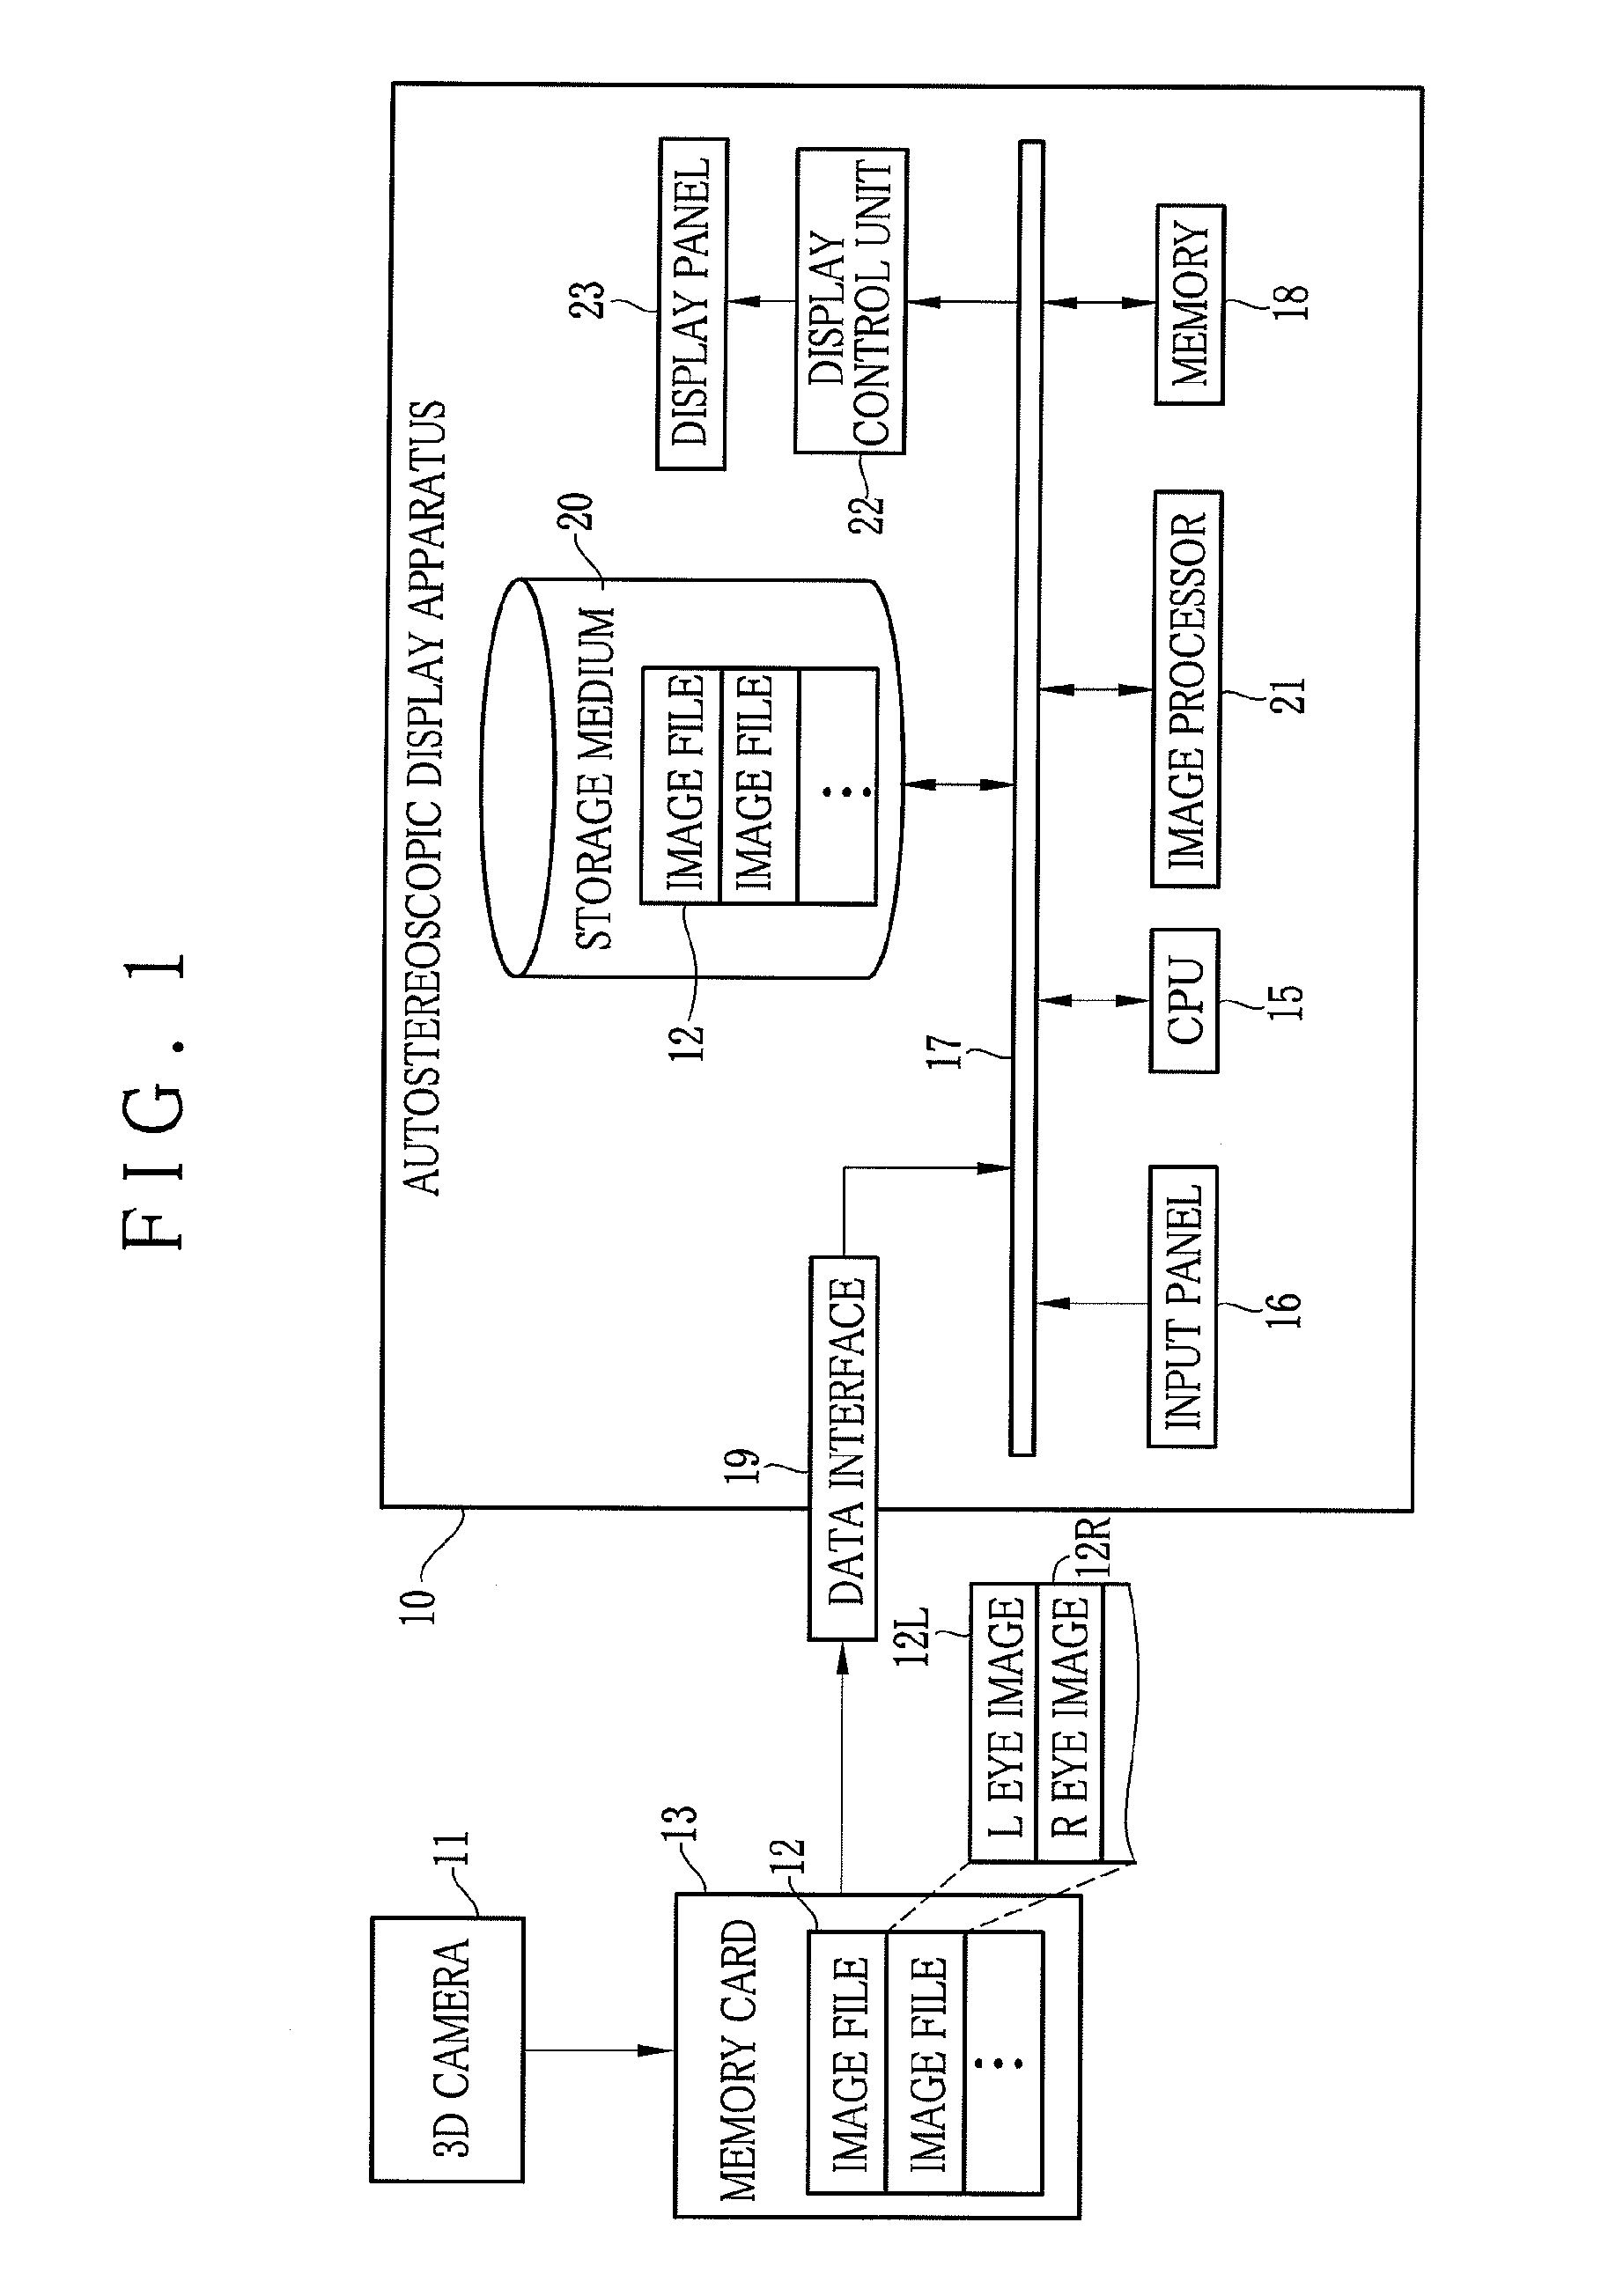 Stereoscopic image display apparatus and changeover method